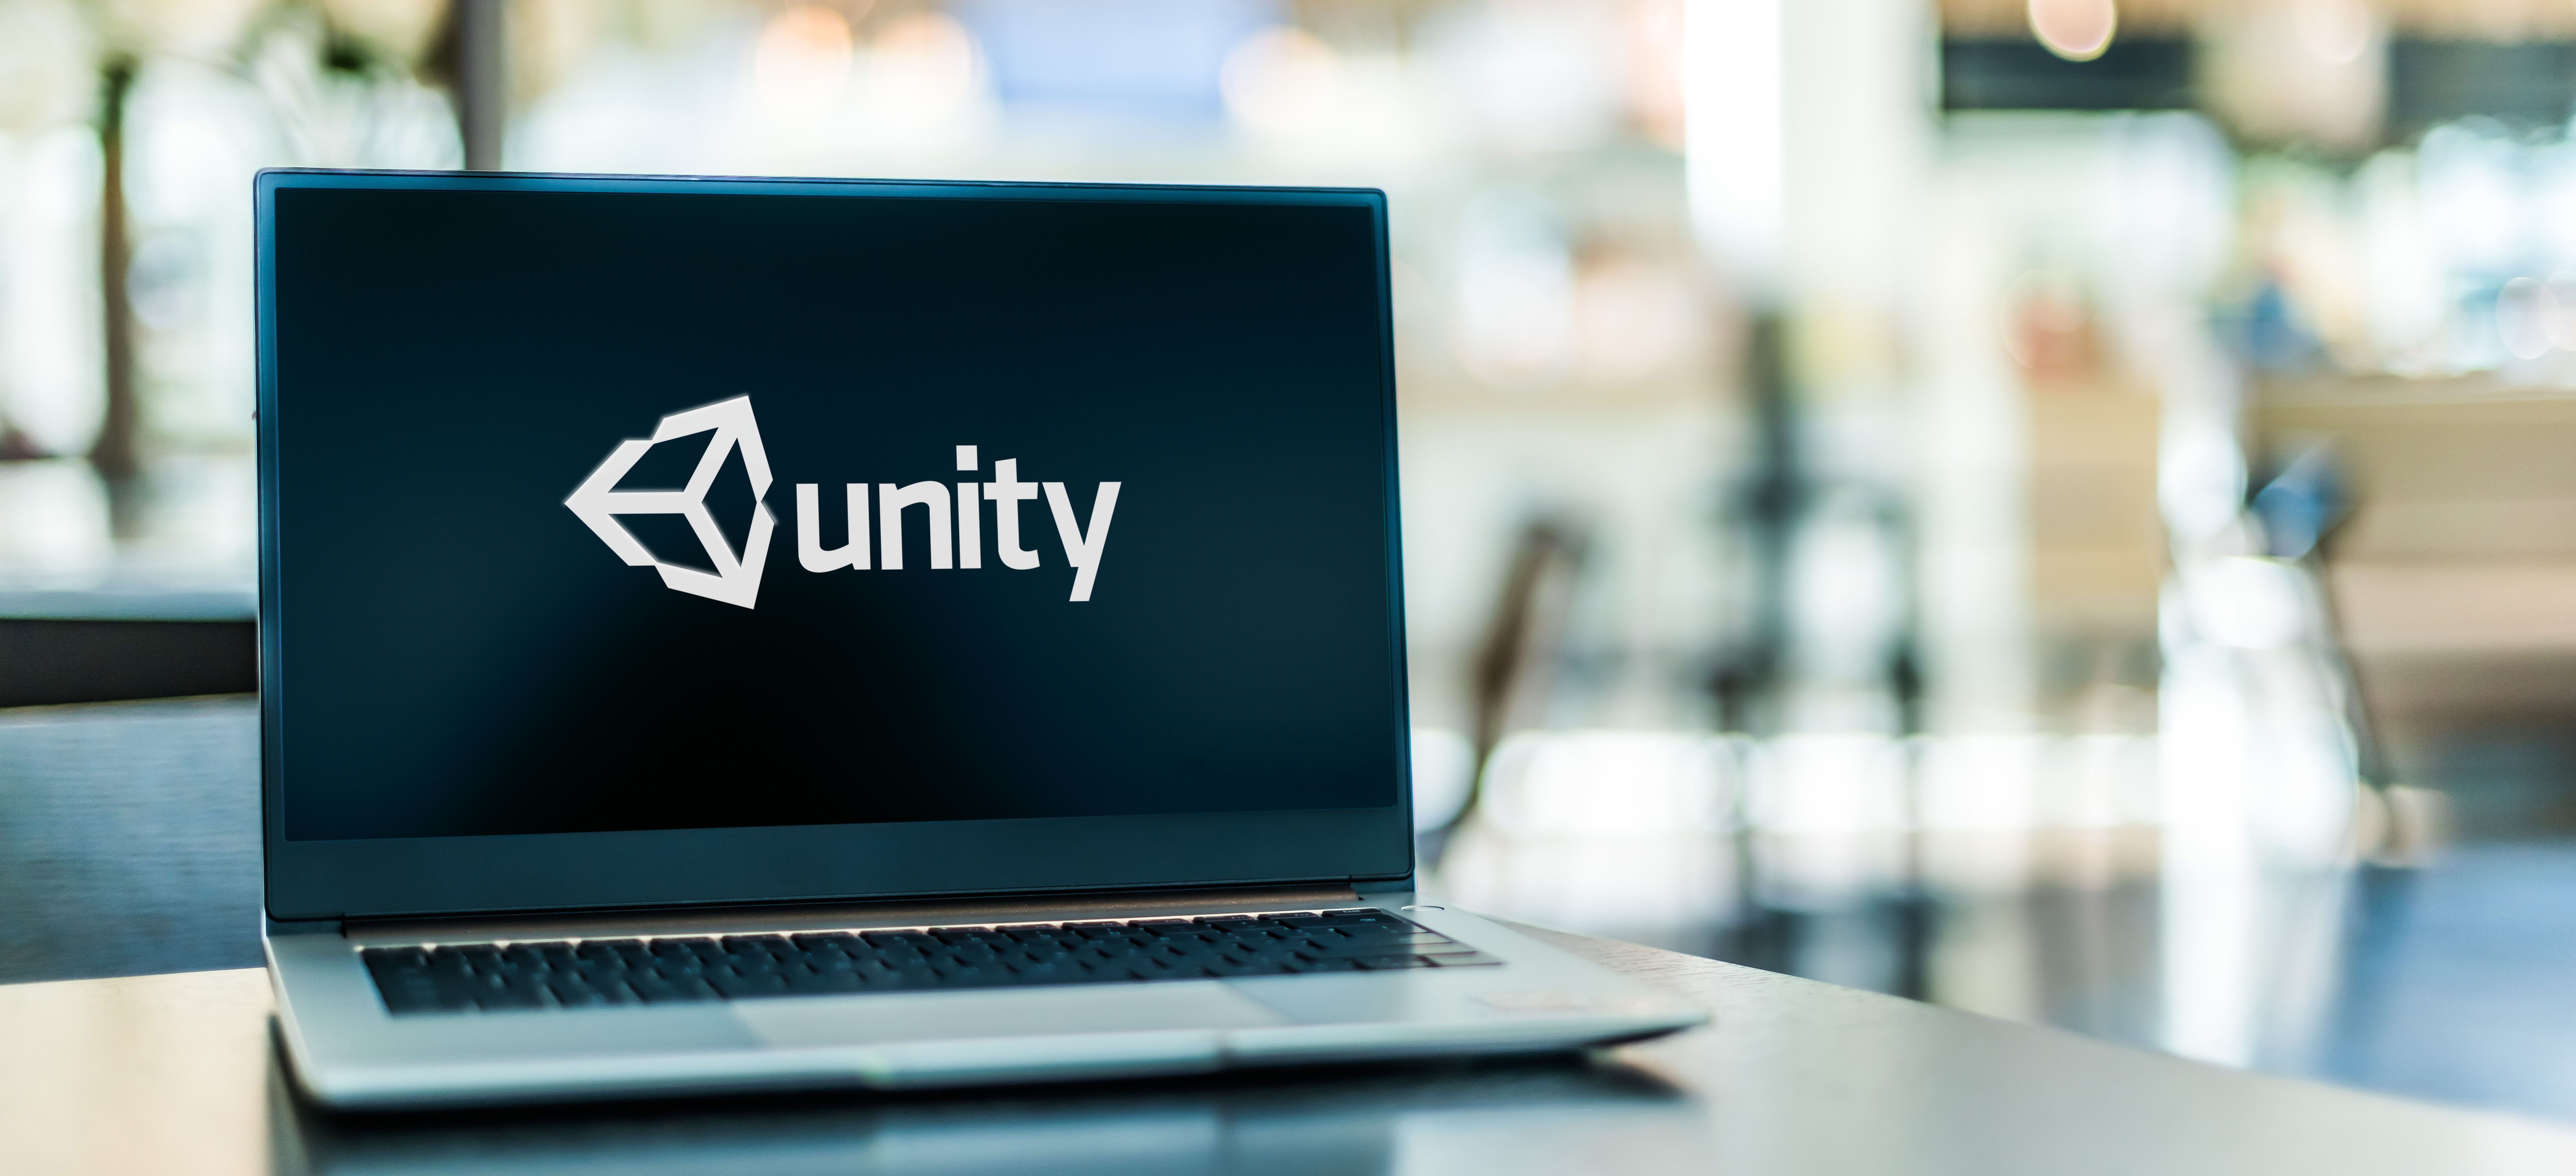 In the midst of the layoff storm, quality Unity Developer is still sought after